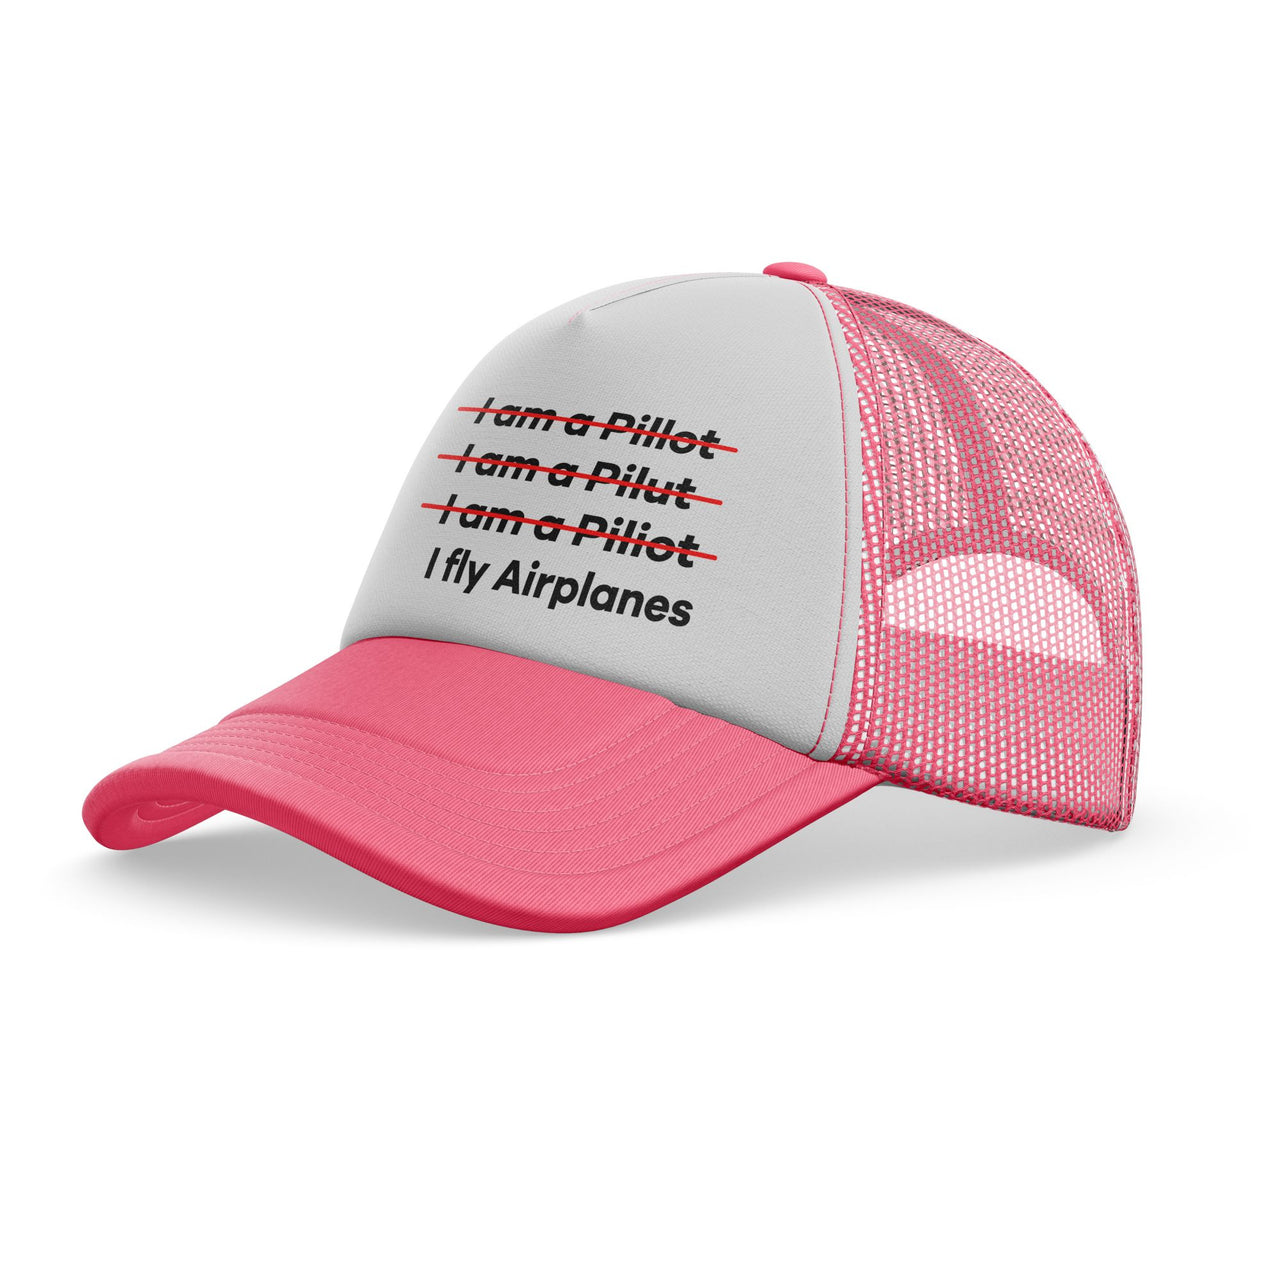 I Fly Airplanes Designed Trucker Caps & Hats